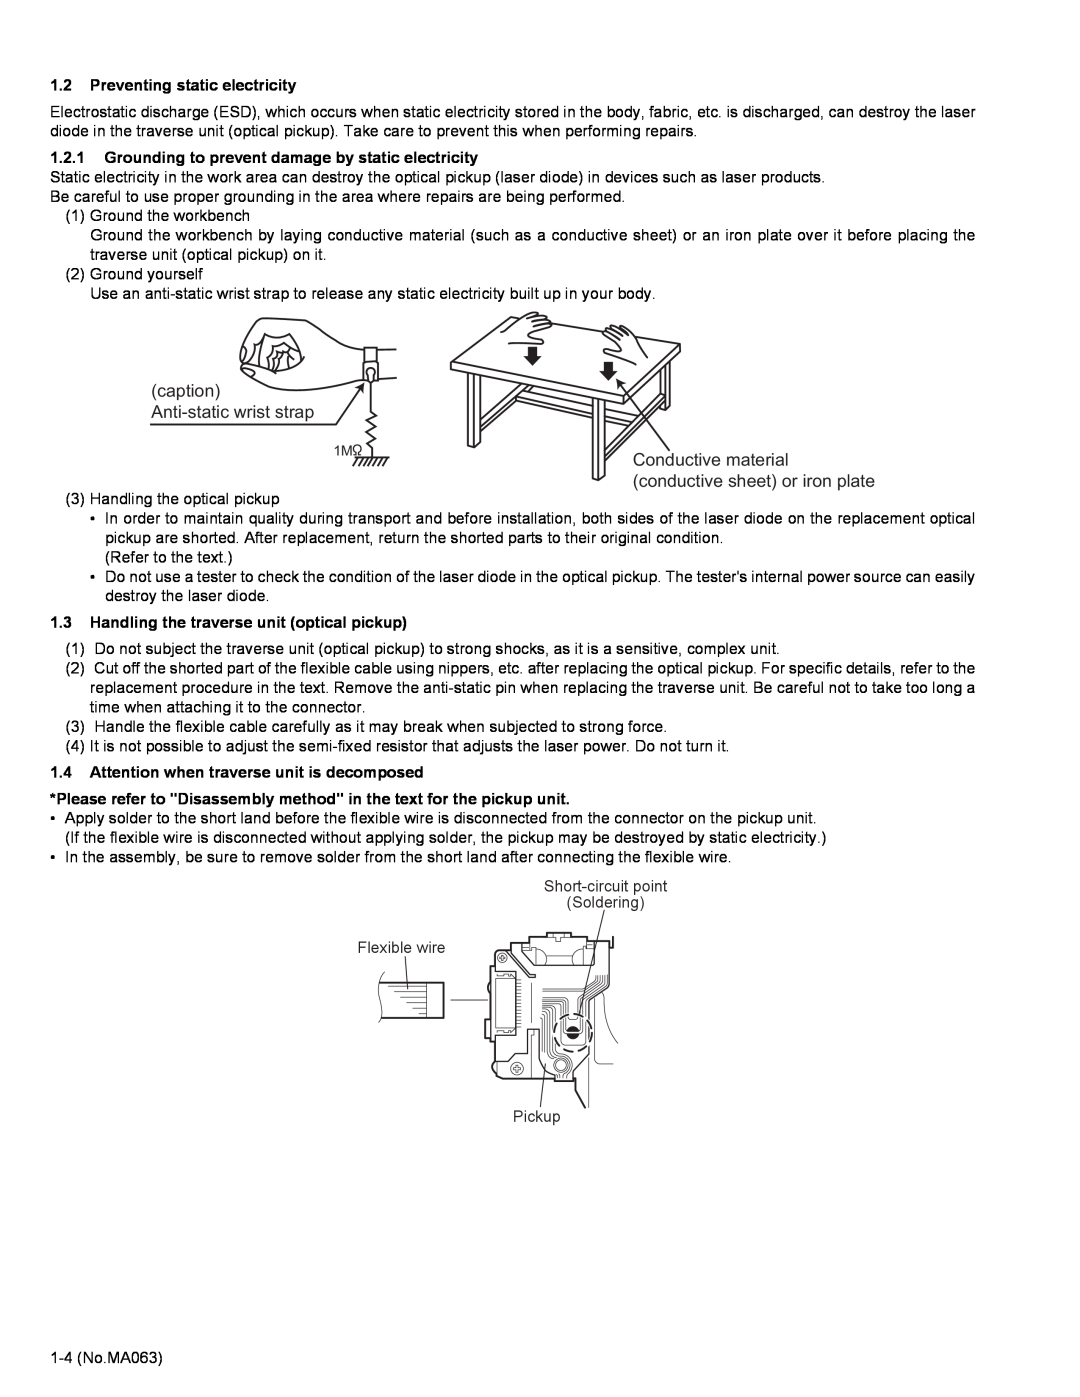 JVC KD-LH401 service manual Preventing static electricity, Grounding to prevent damage by static electricity 